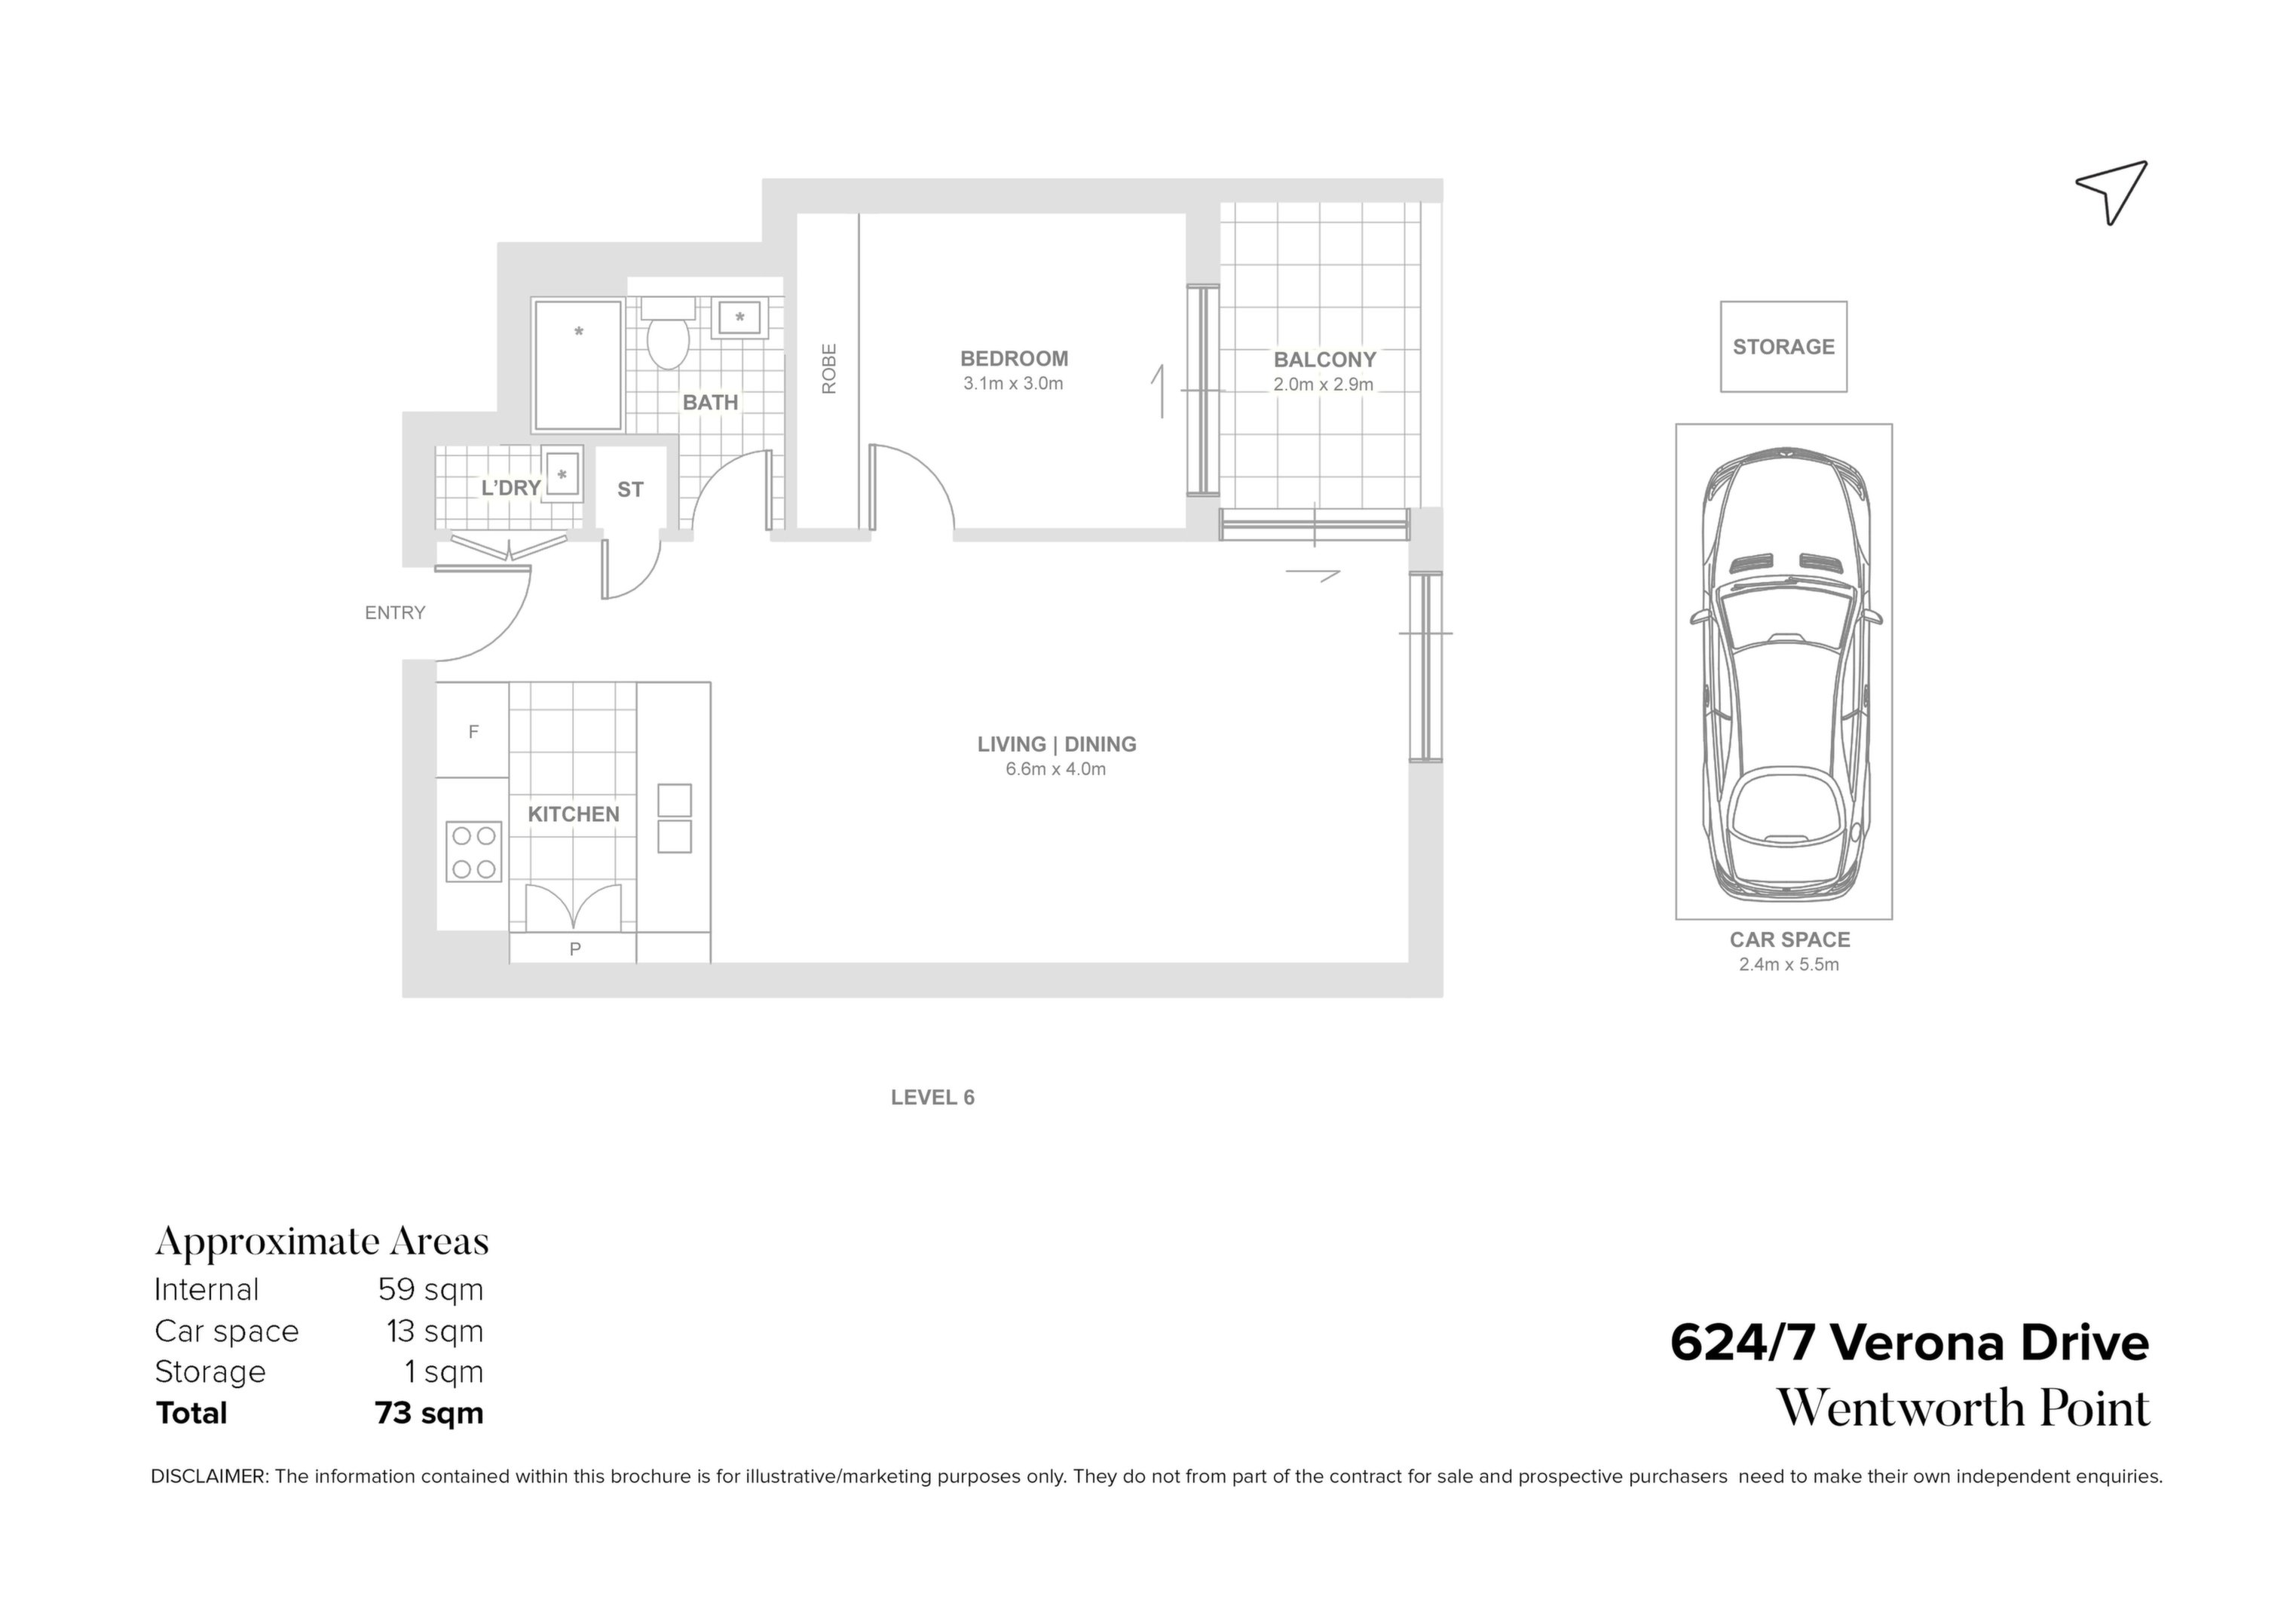 624/7 Verona Drive, Wentworth Point Sold by Chidiac Realty - floorplan